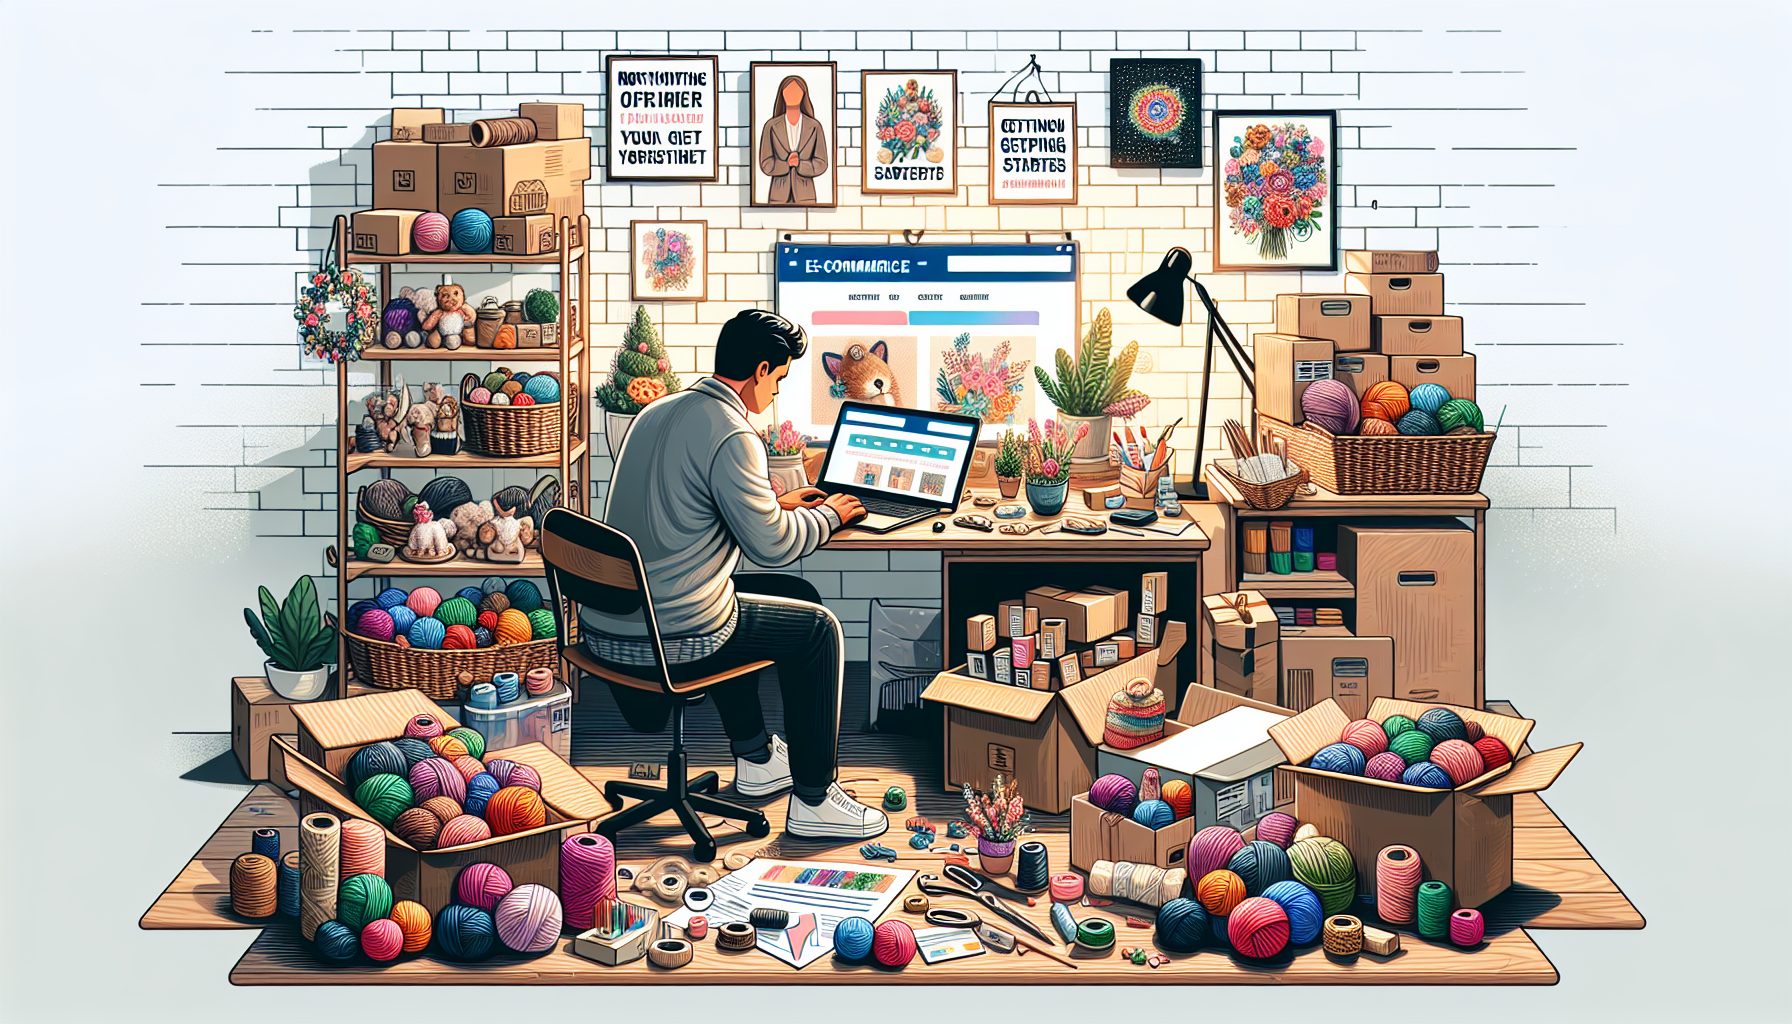 Create a vibrant and detailed illustration of a person setting up their own small shop on Etsy. The scene should include a cozy home studio filled with handmade crafts, such as jewelry, knitted items,